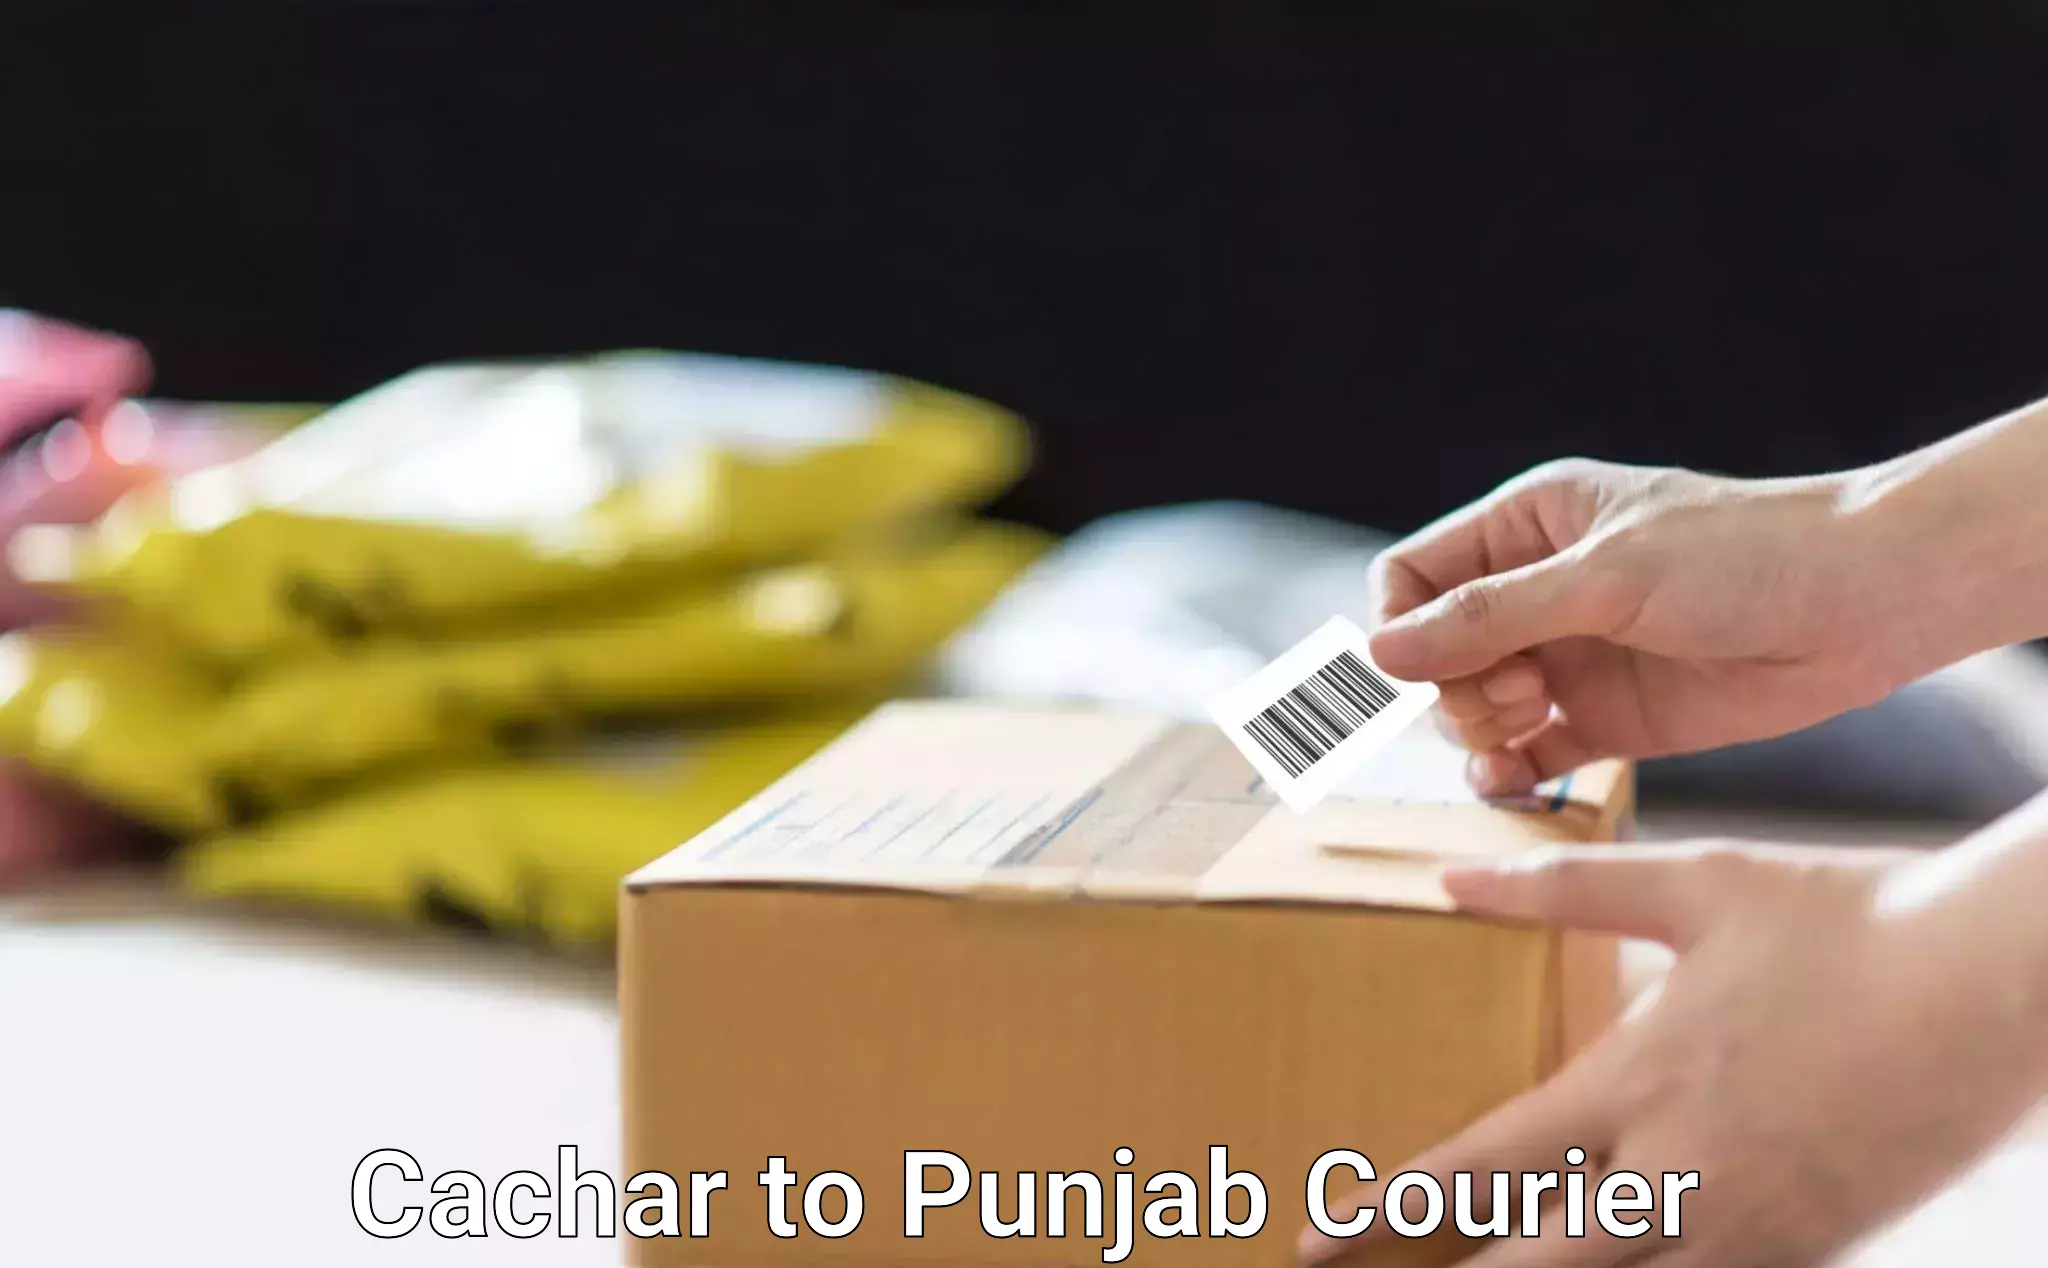 Tailored shipping plans Cachar to Patiala